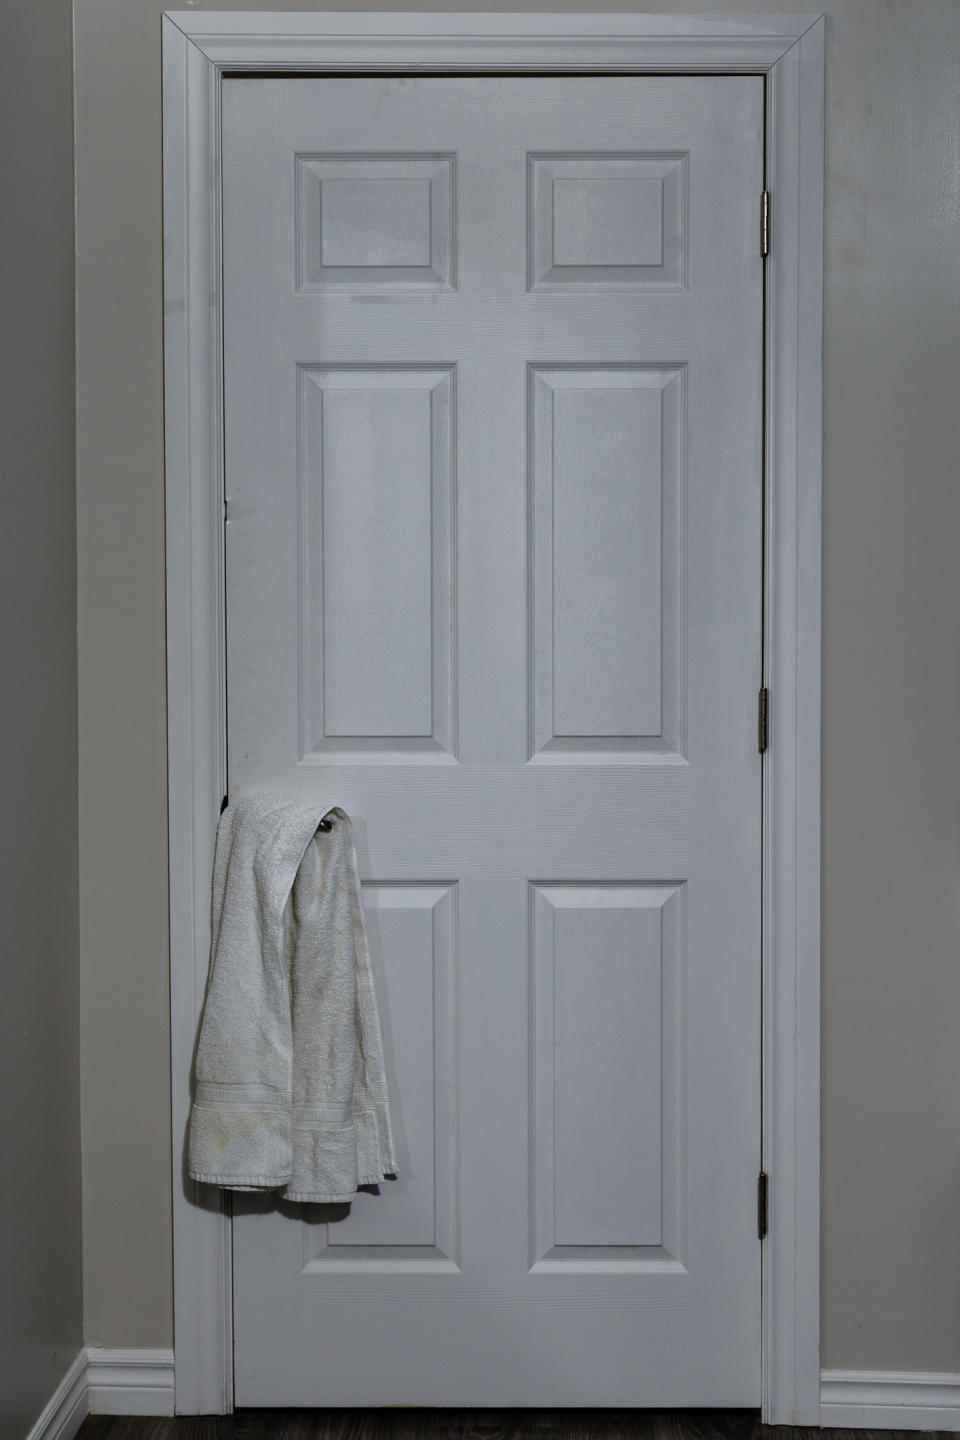 A closed white door with six panels has a white bath towel hanging on the handle. There are no people or other objects in the image